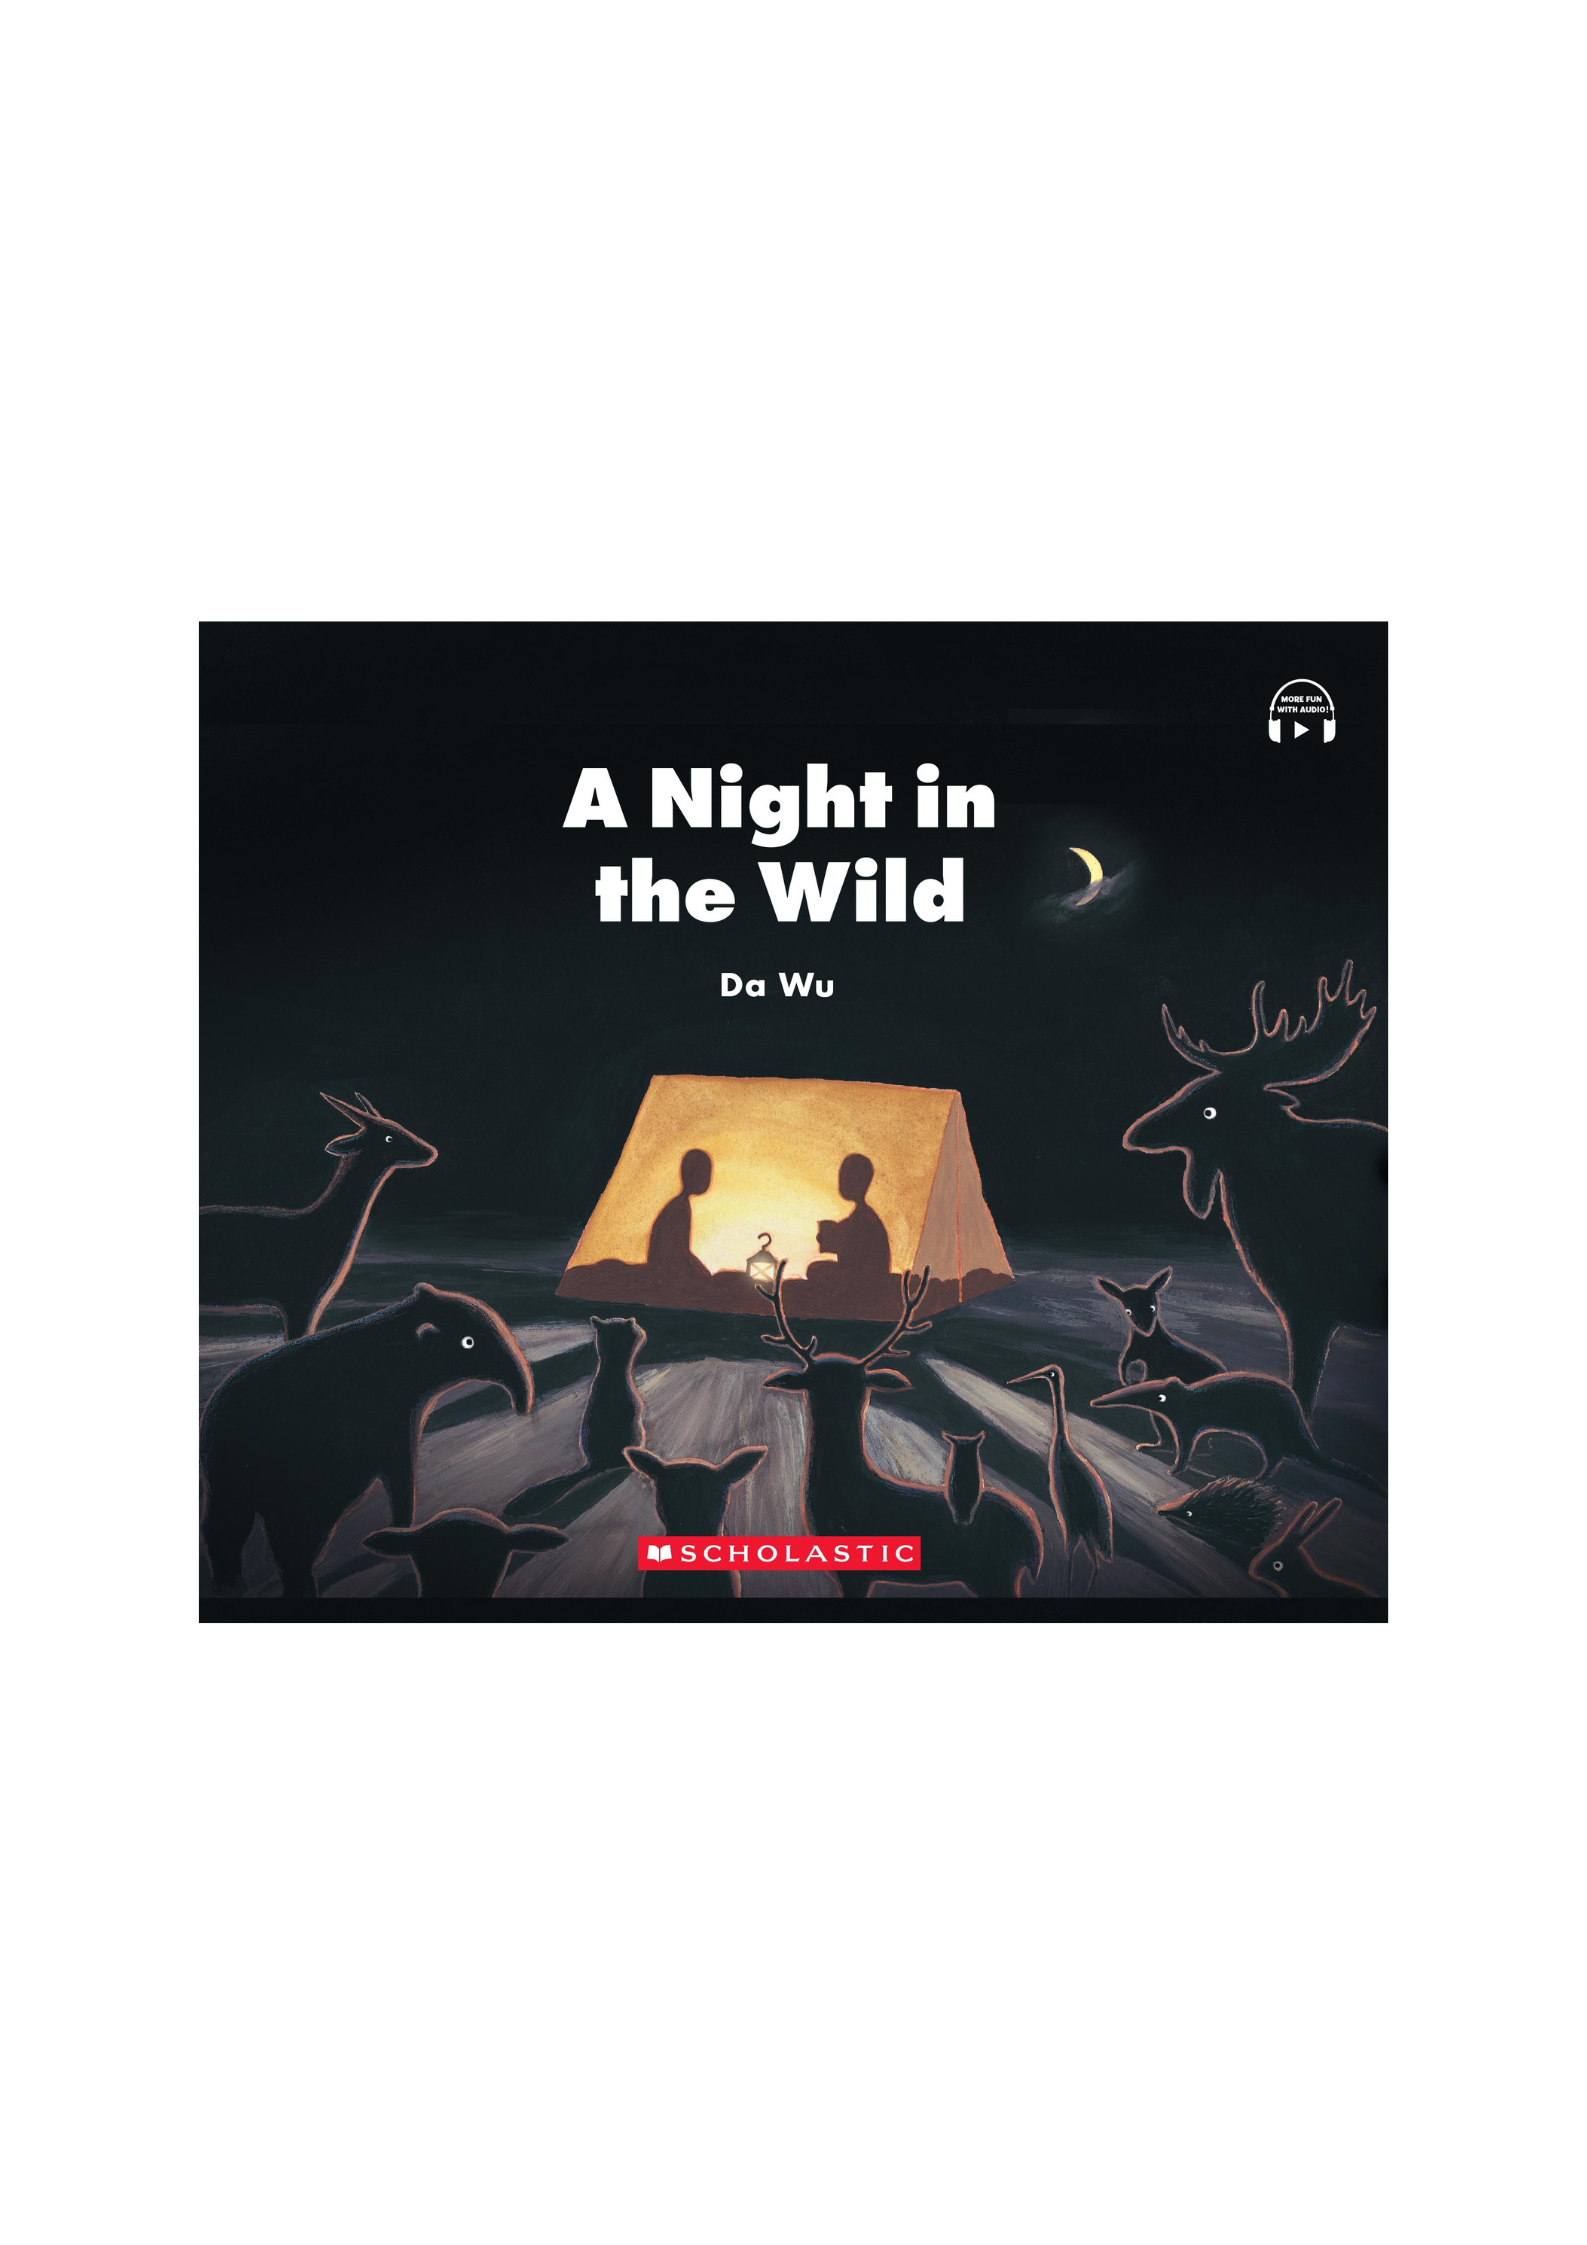 A Night in the Wild